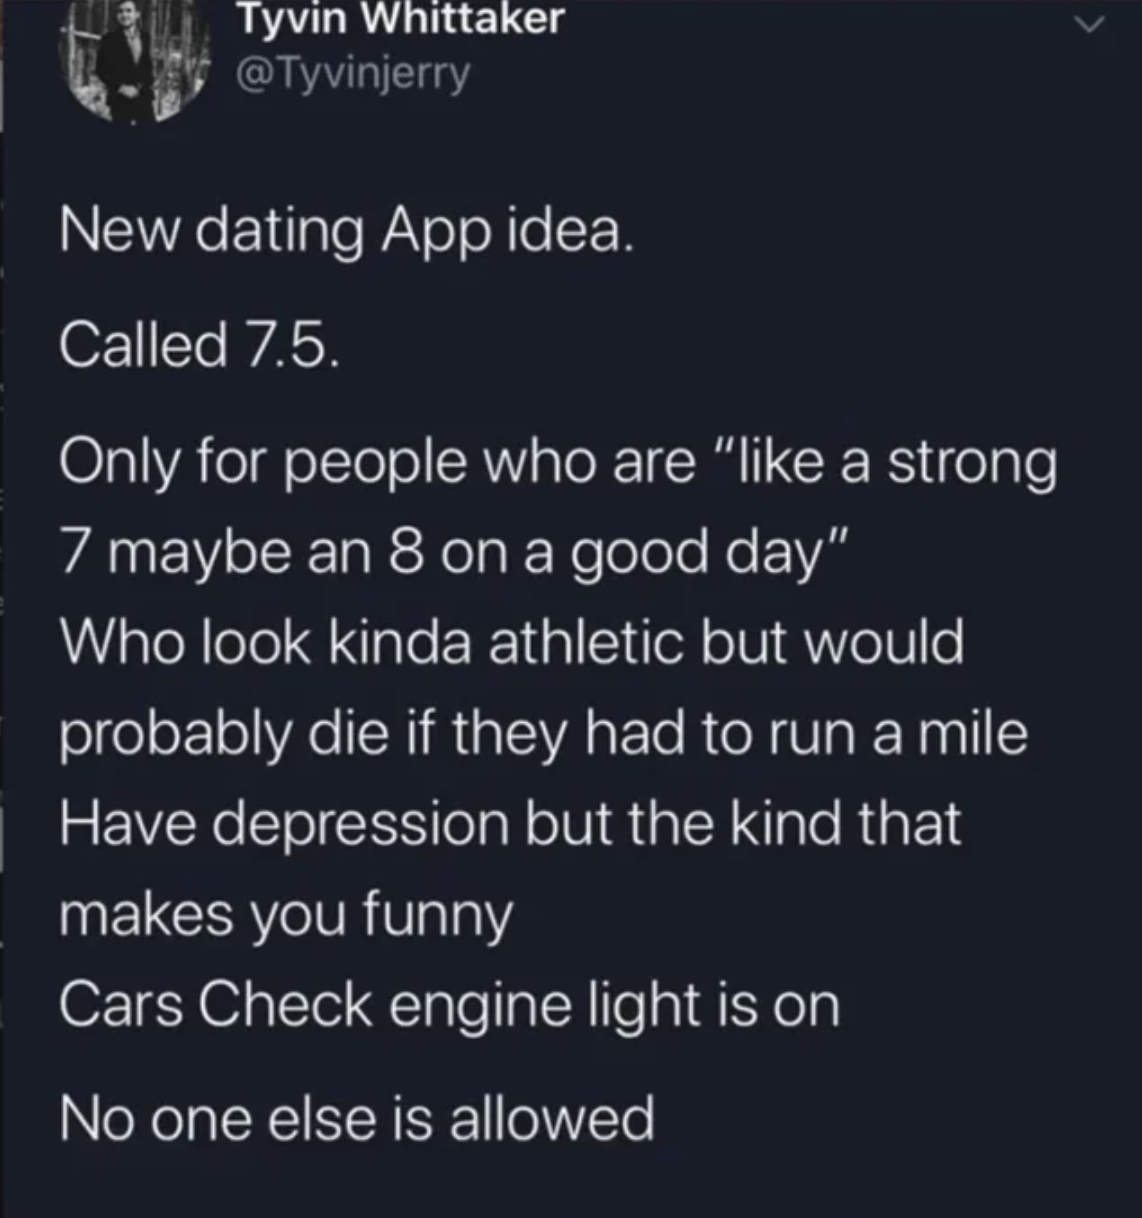 screenshot - Tyvin Whittaker New dating App idea. Called 7.5. Only for people who are " a strong 7 maybe an 8 on a good day" Who look kinda athletic but would probably die if they had to run a mile Have depression but the kind that makes you funny Cars Ch